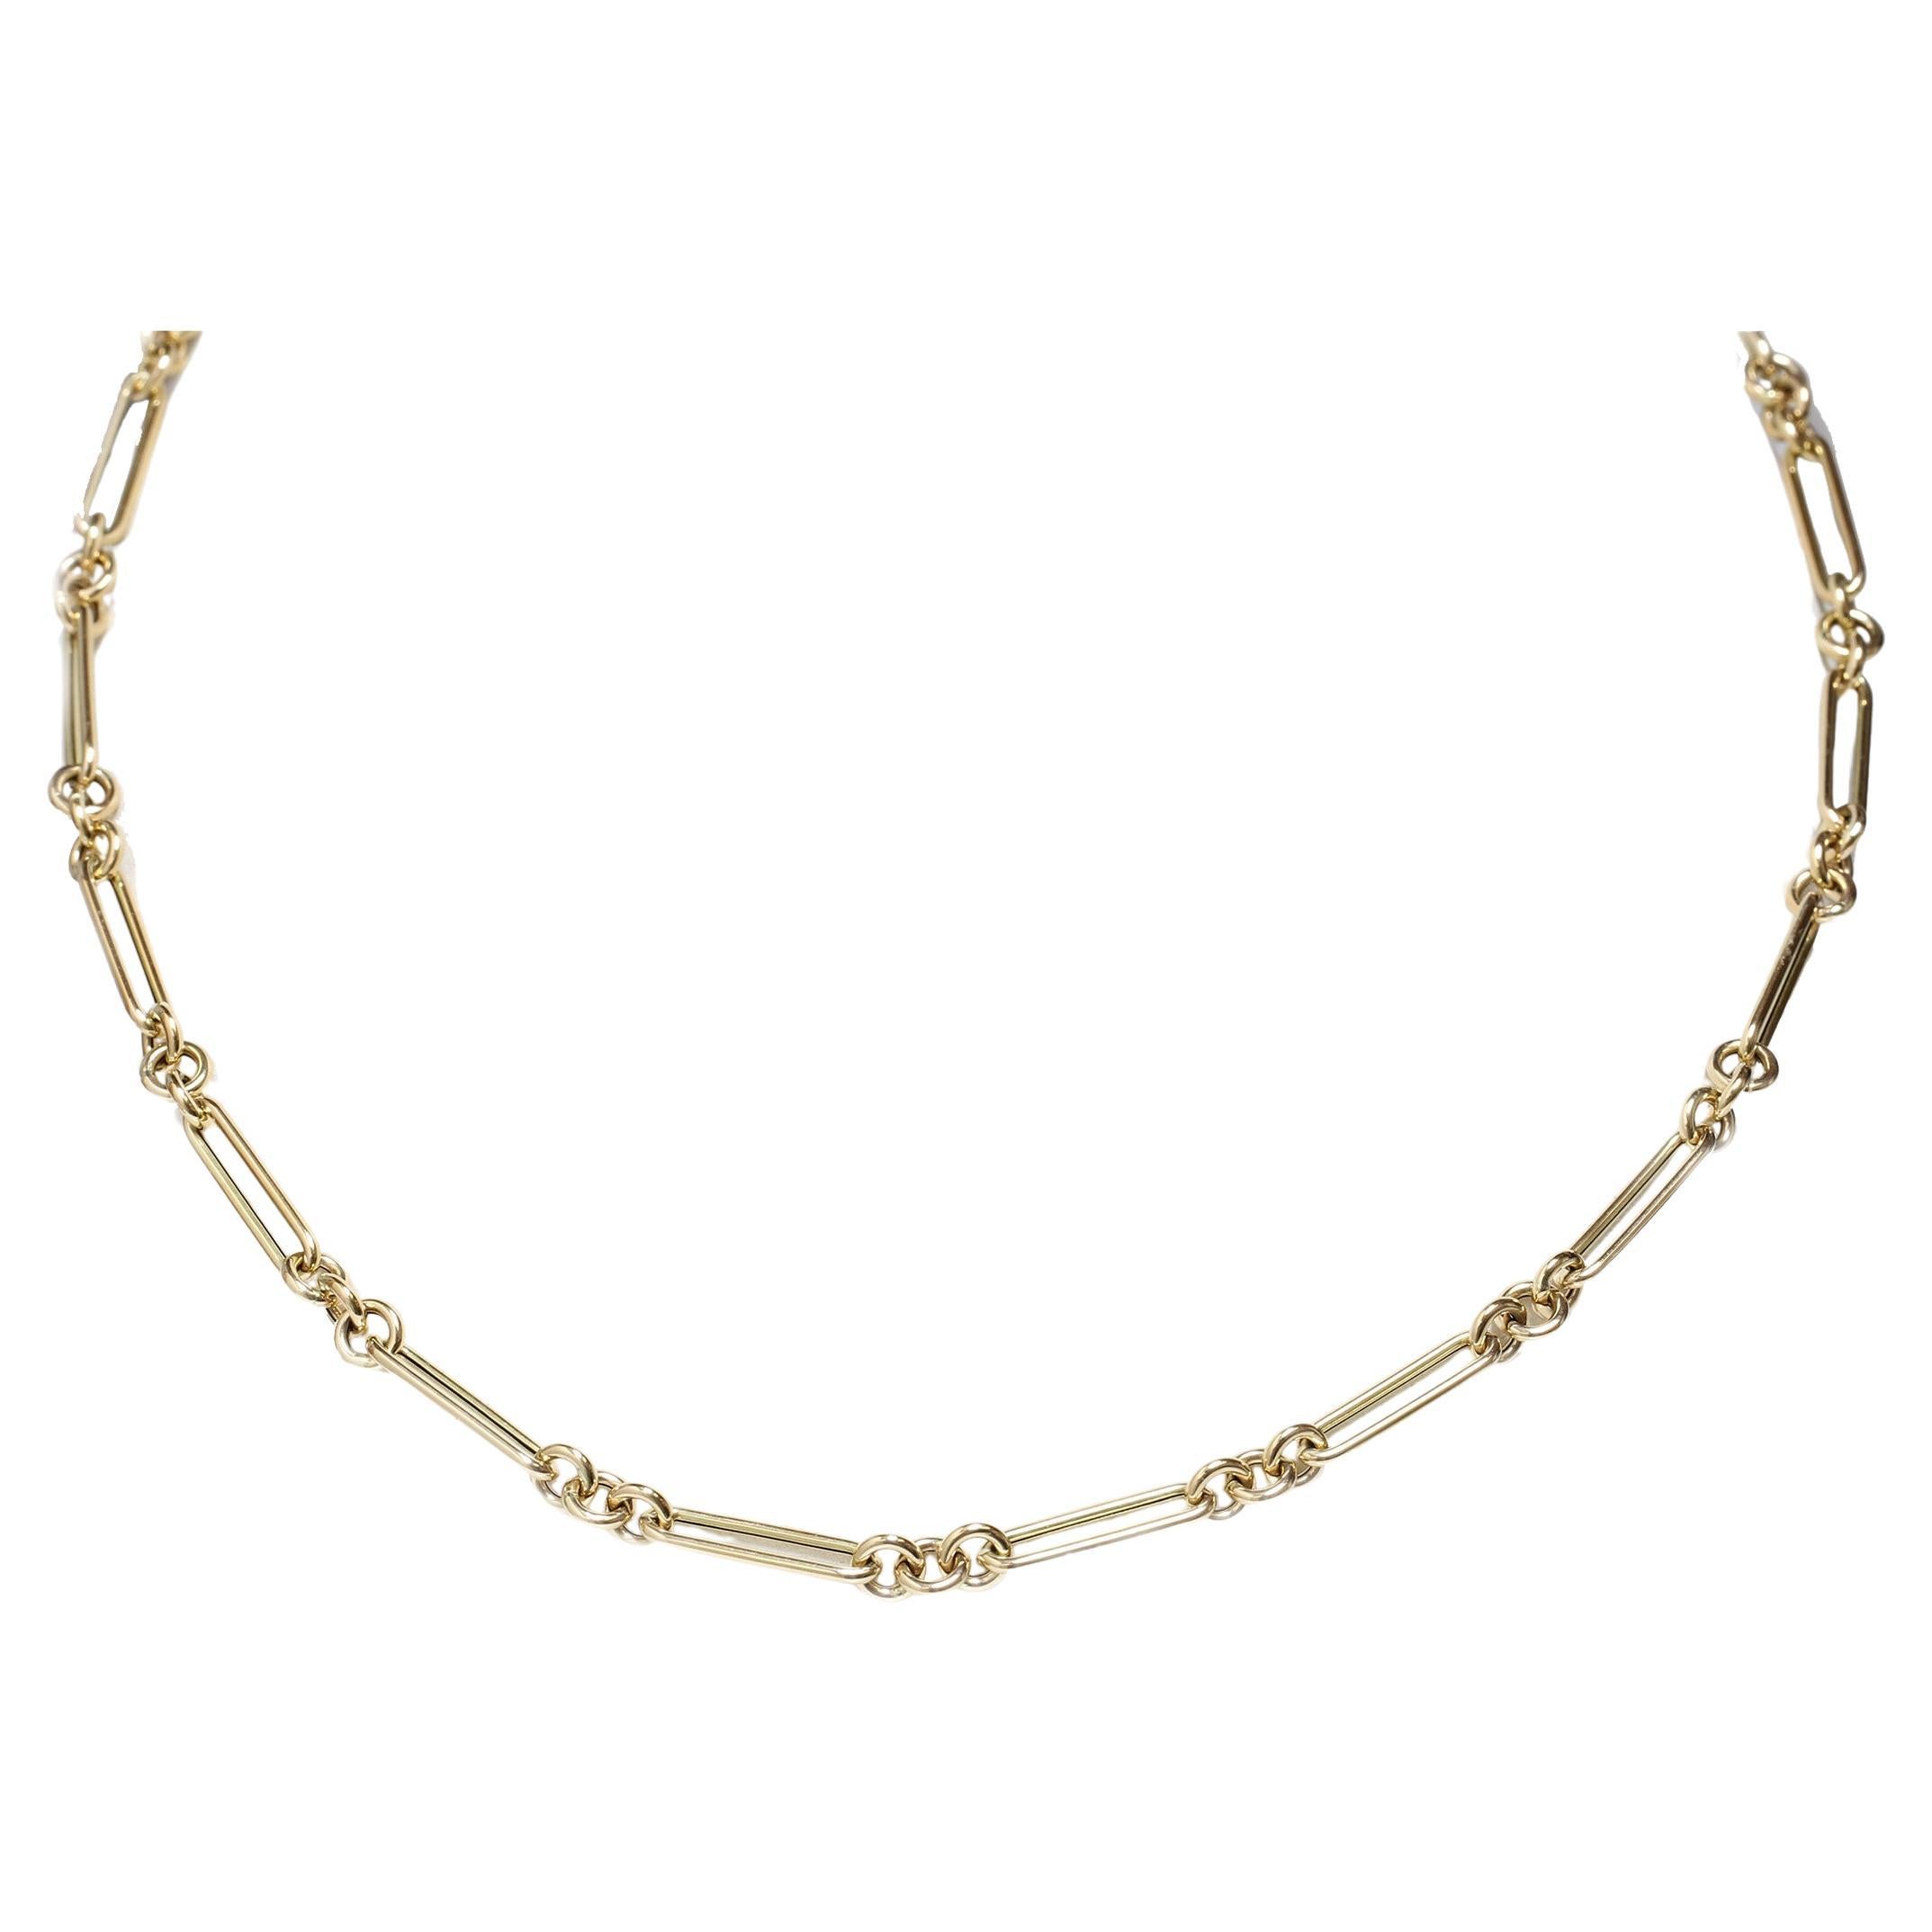 Paper Clip Link and Rolo Chain Necklace in 14K Yellow Gold - 30"